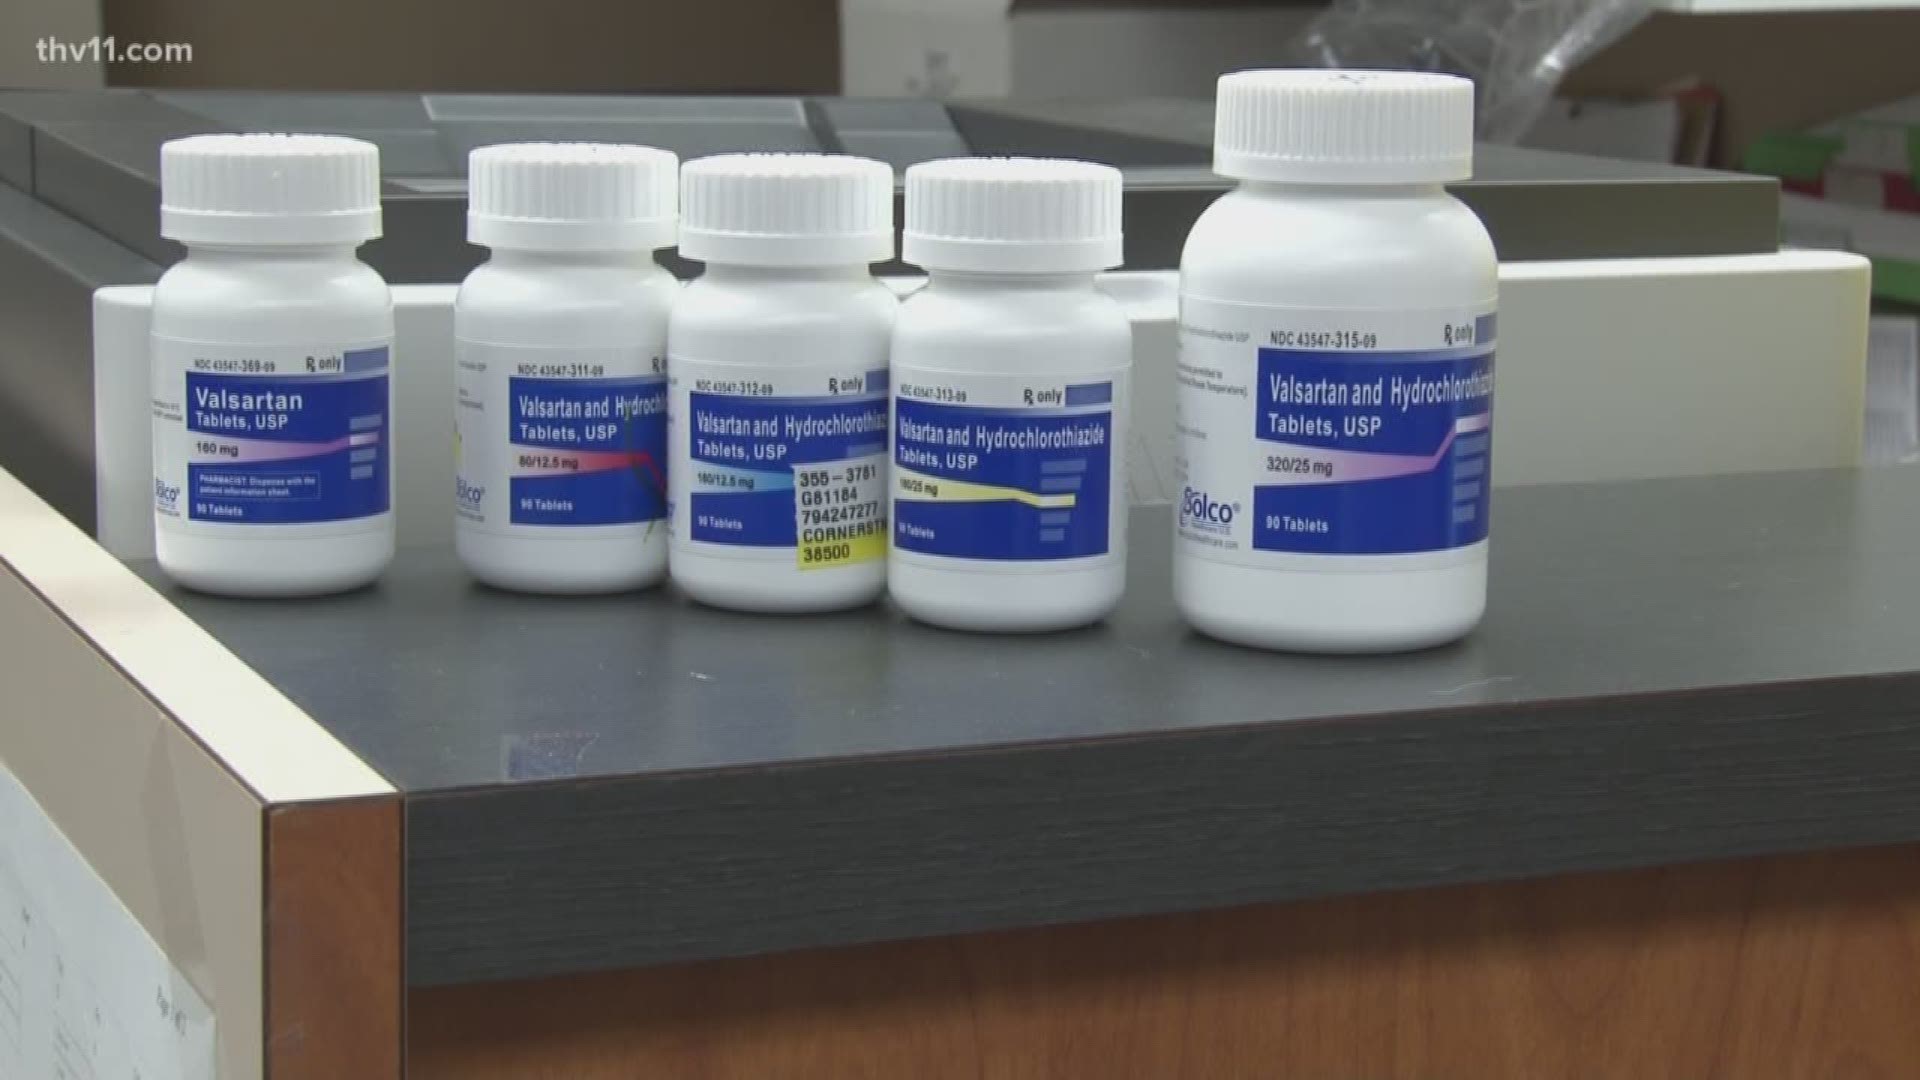 The FDA has added more manufactures to the recall list.